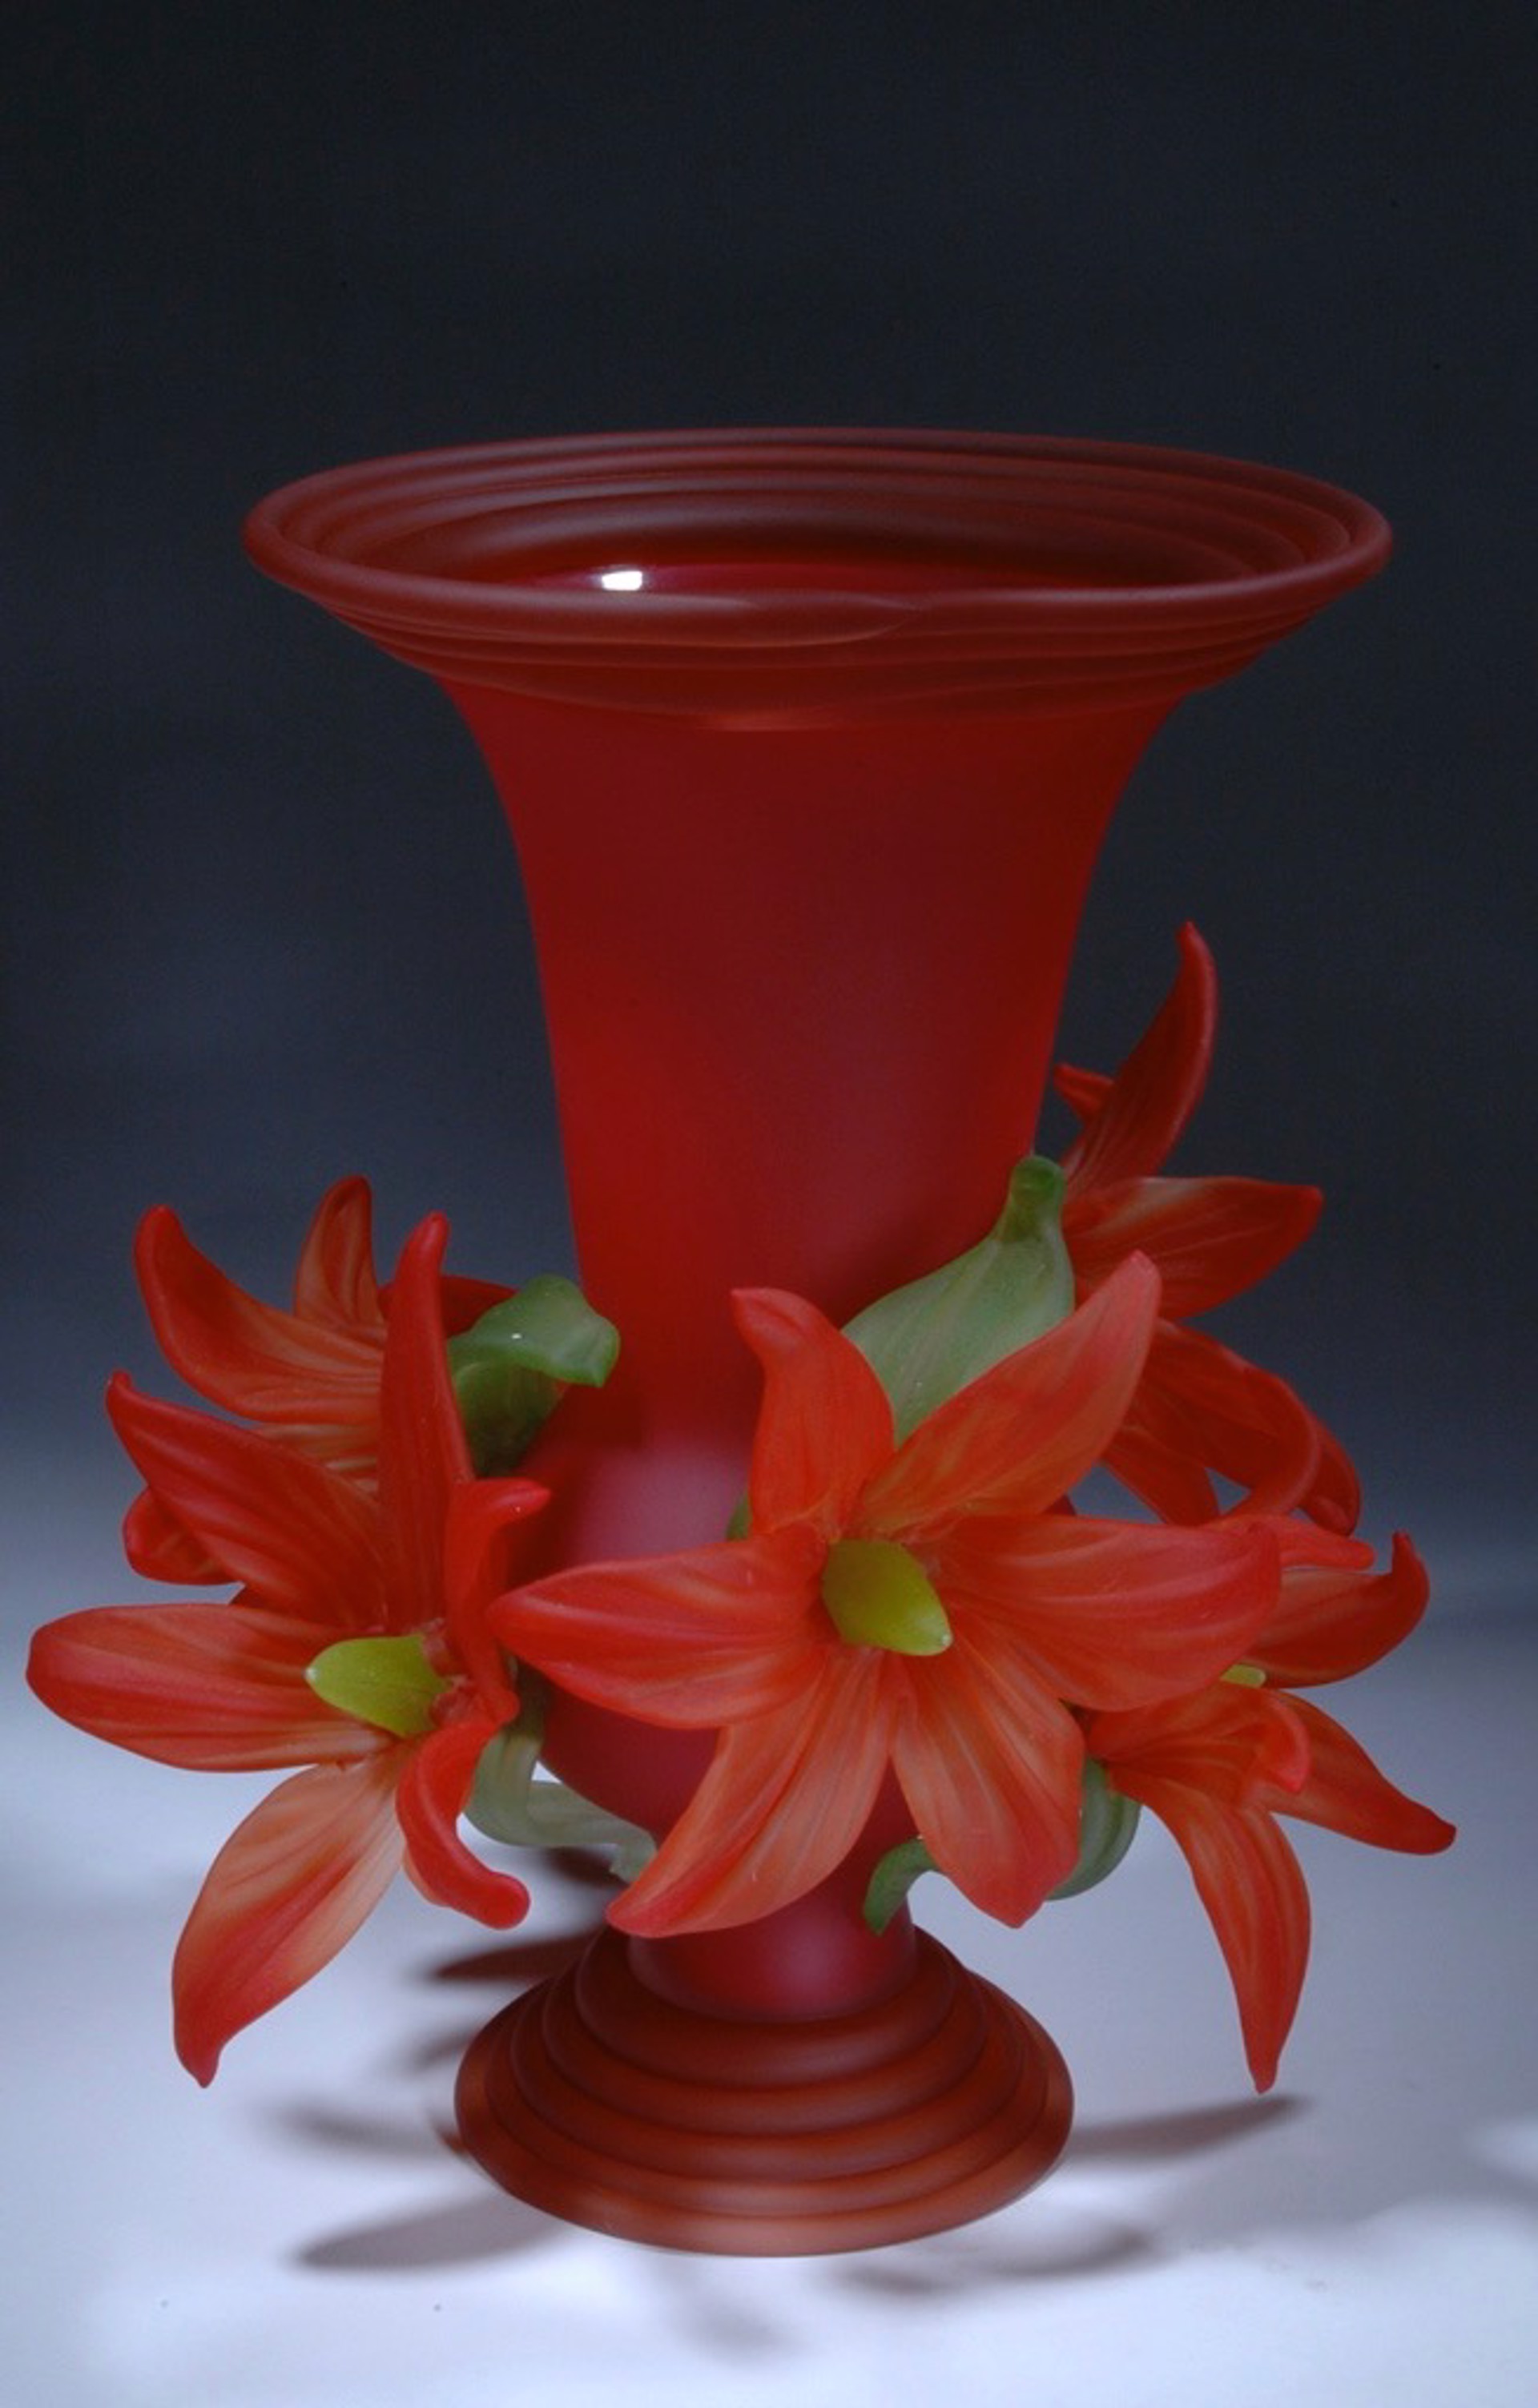 Red with Red Lilies (6 flowers) by Susan Rankin